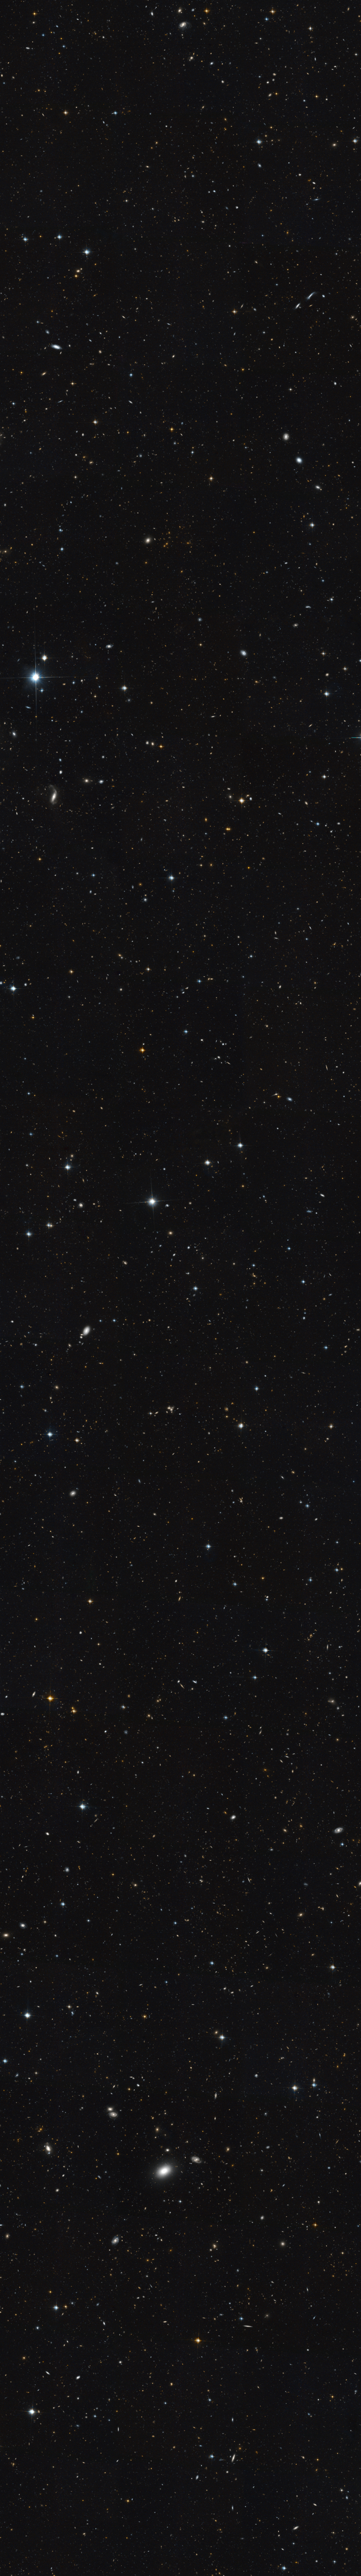 The Extended Groth Strip covers a small swath of sky between the constellations Ursa Major and Boötes, and yet it contains at least 50,000 galaxies visible to NASA’s Hubble Space Telescope, and likely more that are beyond the range of light that Hubble can detect.